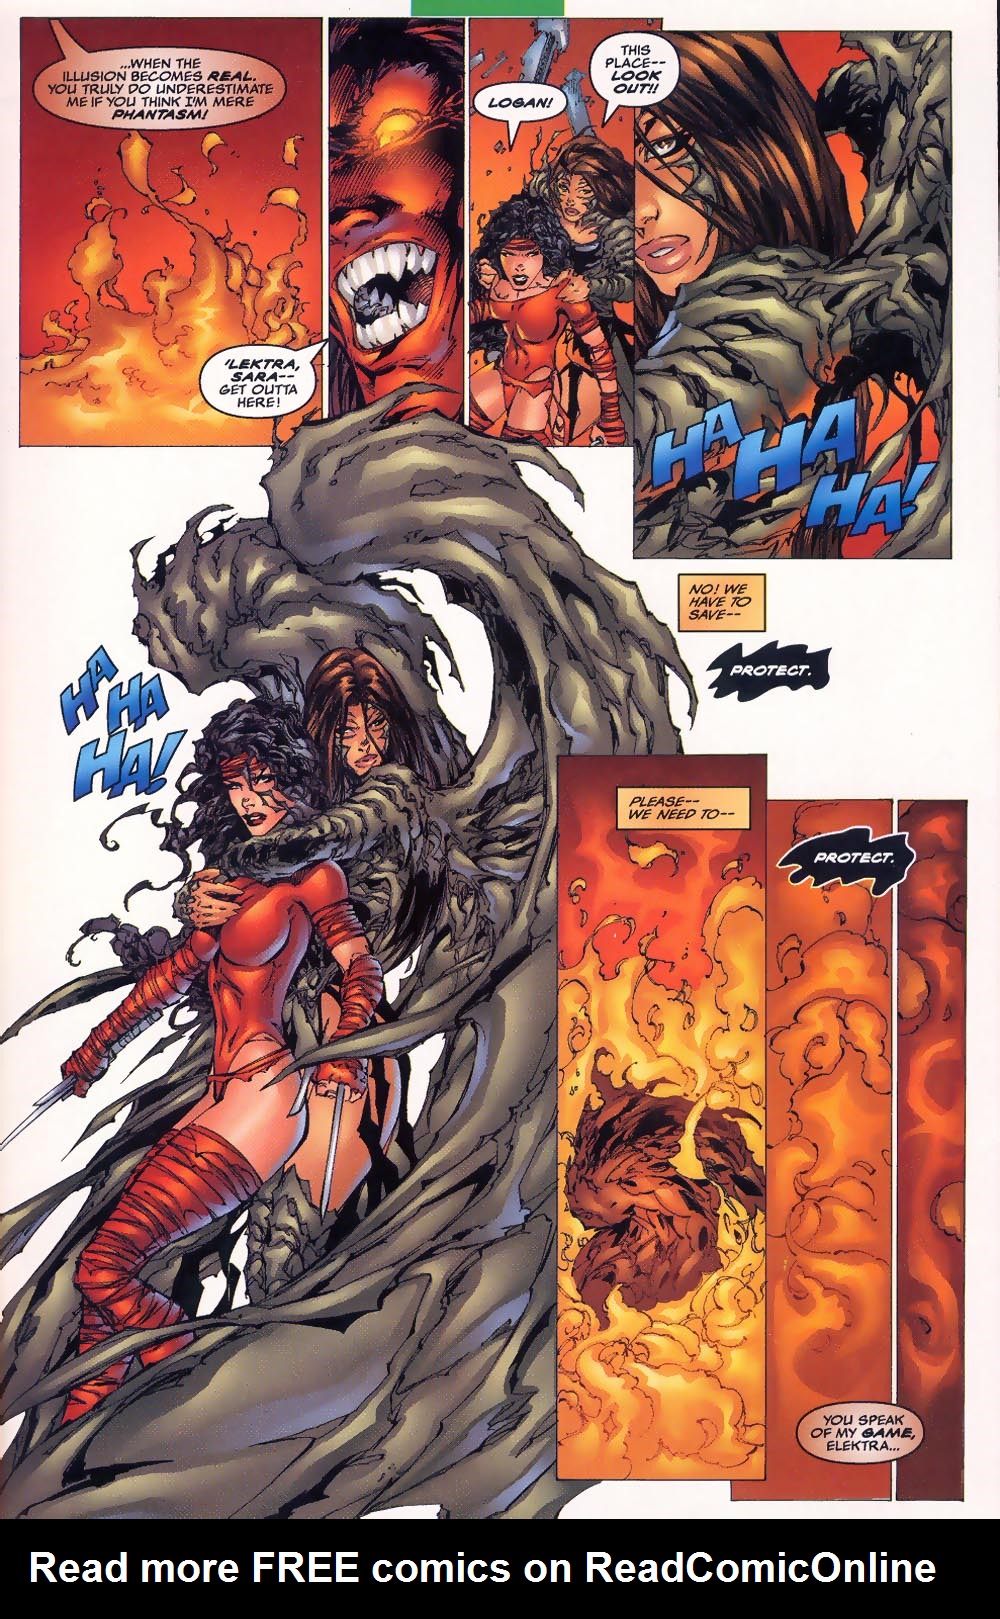 Read online Witchblade/Elektra comic -  Issue # Full - 7